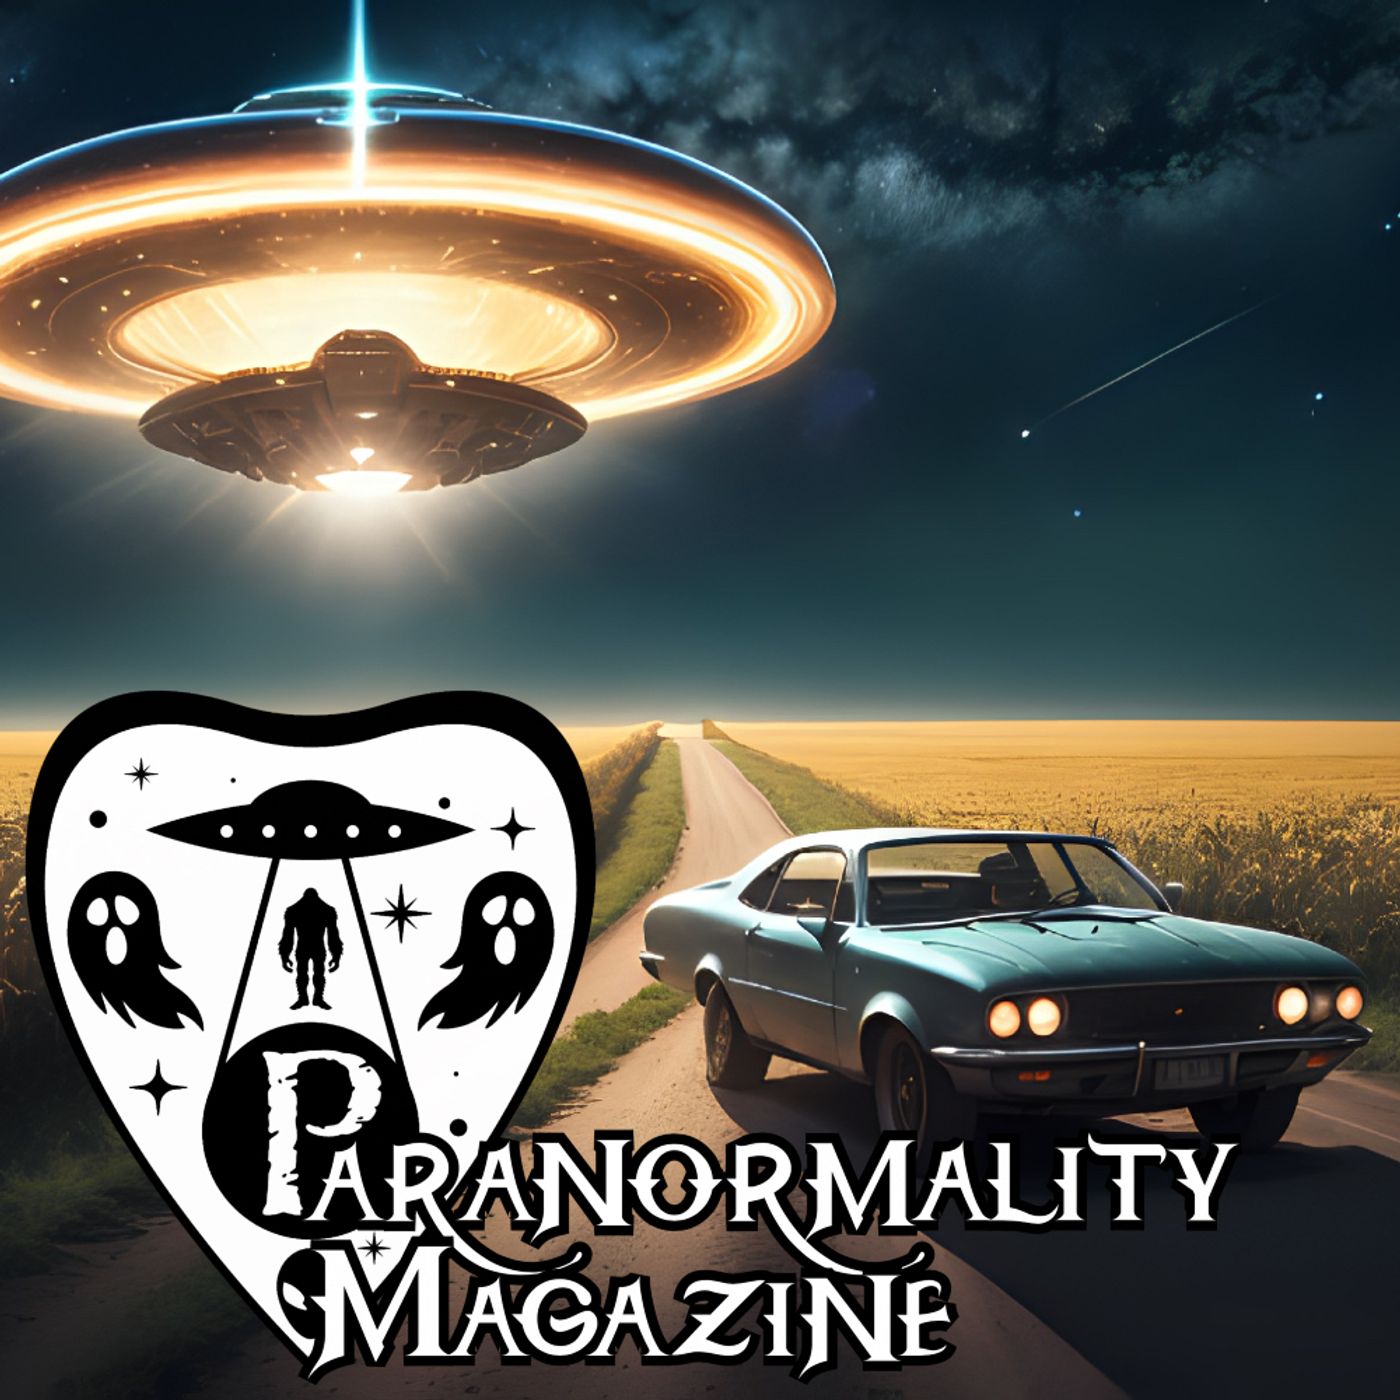 (Bonus Episode!) “TOP 10 UFO SIGHTINGS OF ALL TIME” #ParanormalityMag